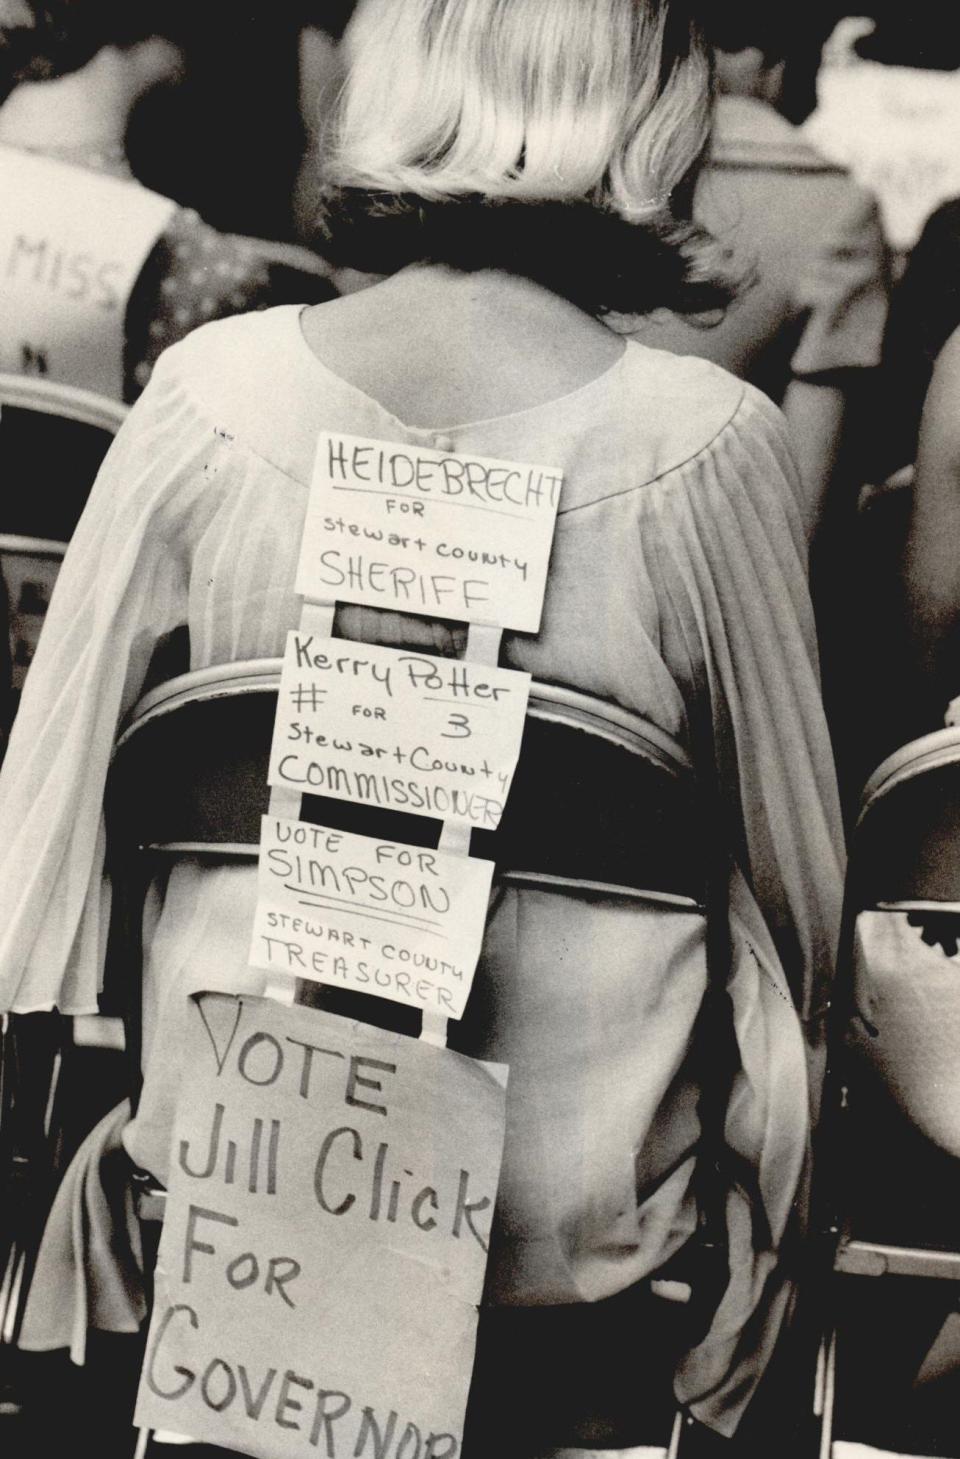 A participant in the 1968 Girls' State session let others know which candidates she was backing for sheriff, county commissioner, county treasurer and governor.